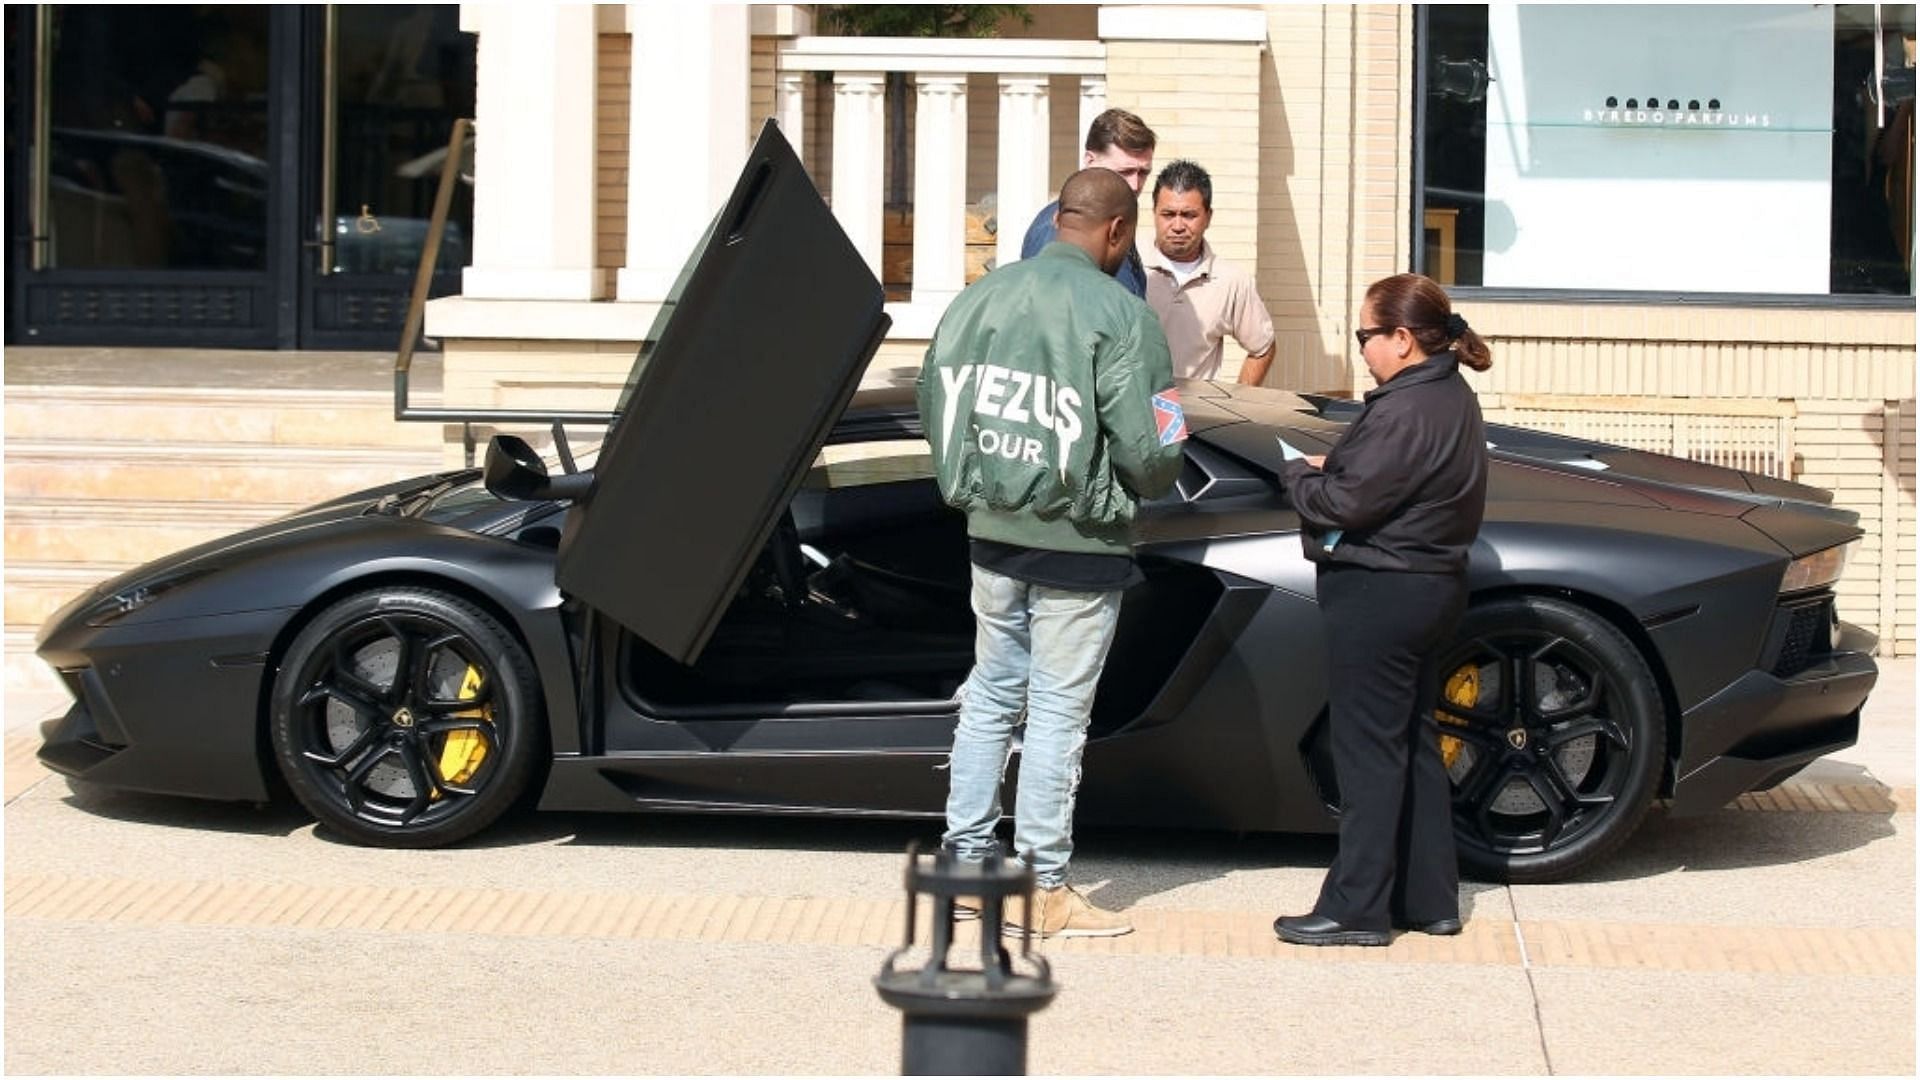 Kanye West with his Lamborghini Aventador (Image via Bauer-Griffin/Getty Images)